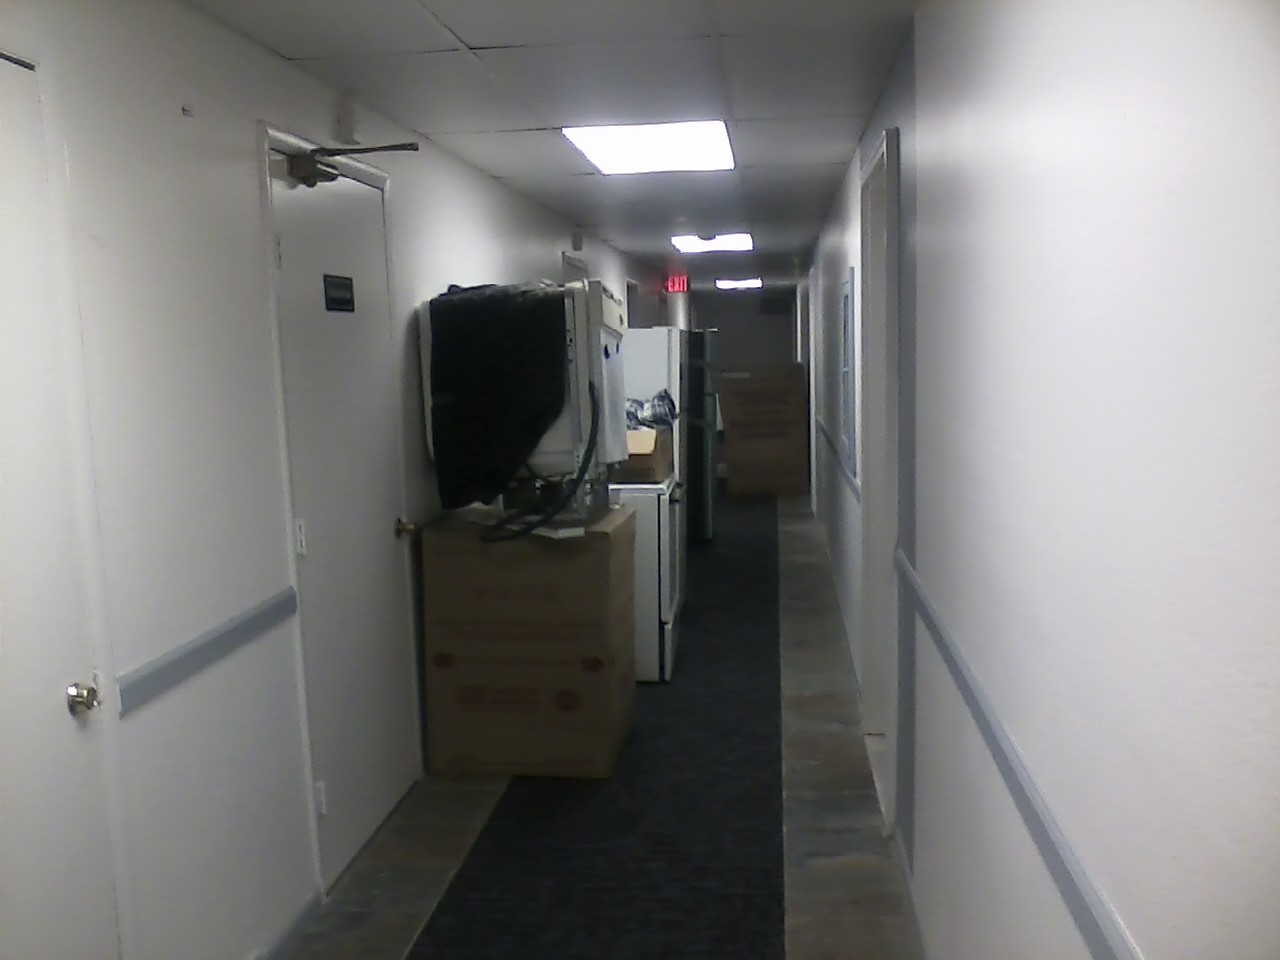 Old appliances stacked in the hallways after a resident demanded they be moved out of the storage locker room.